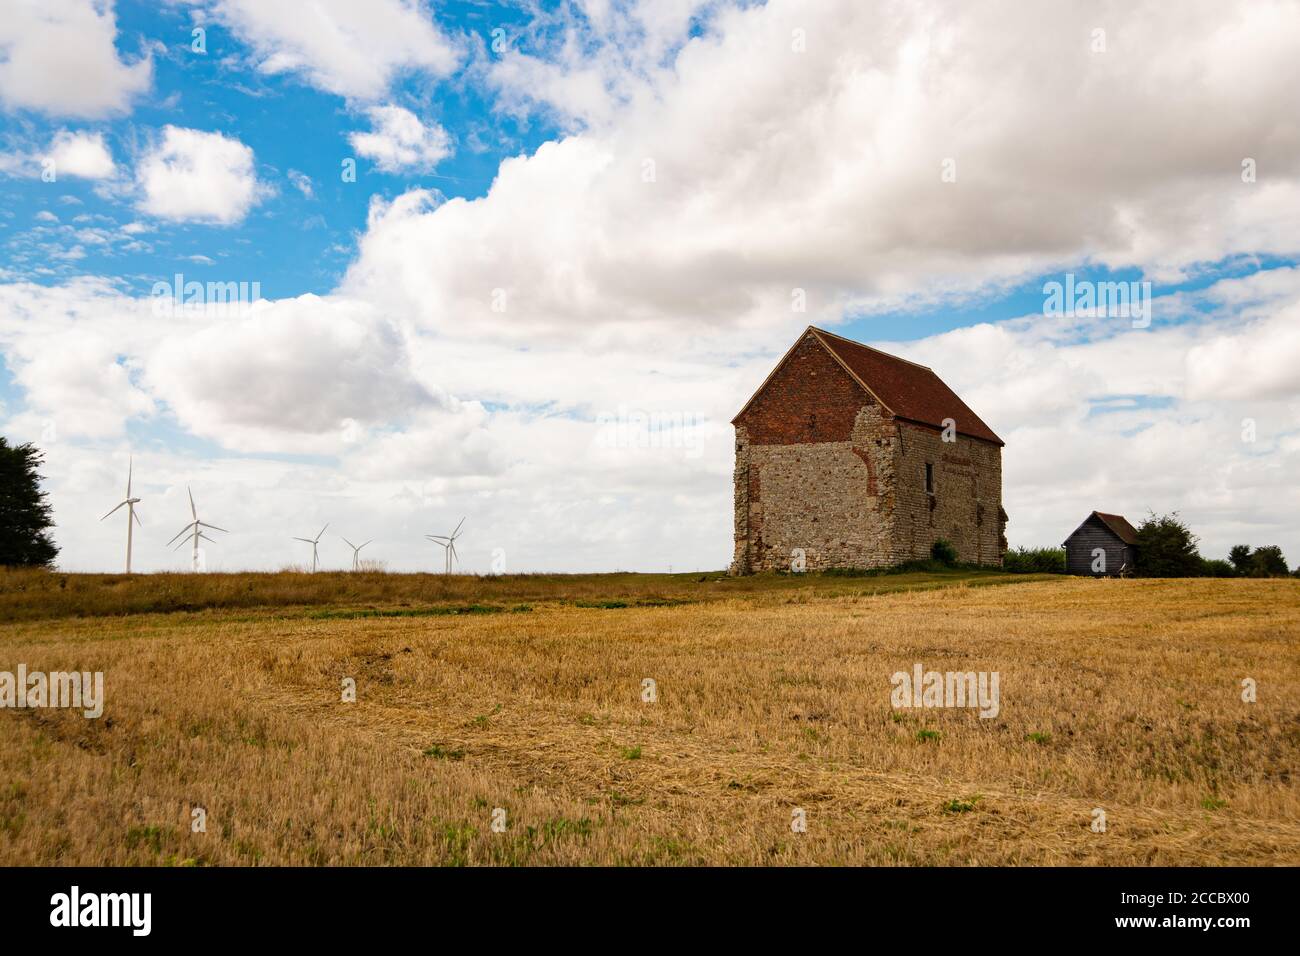 The Chapel of St Peter-on-the-Wall, Bradwell-on-Sea, Essex, is a Grade I listed building and among the oldest intact Christian churches in England. Stock Photo